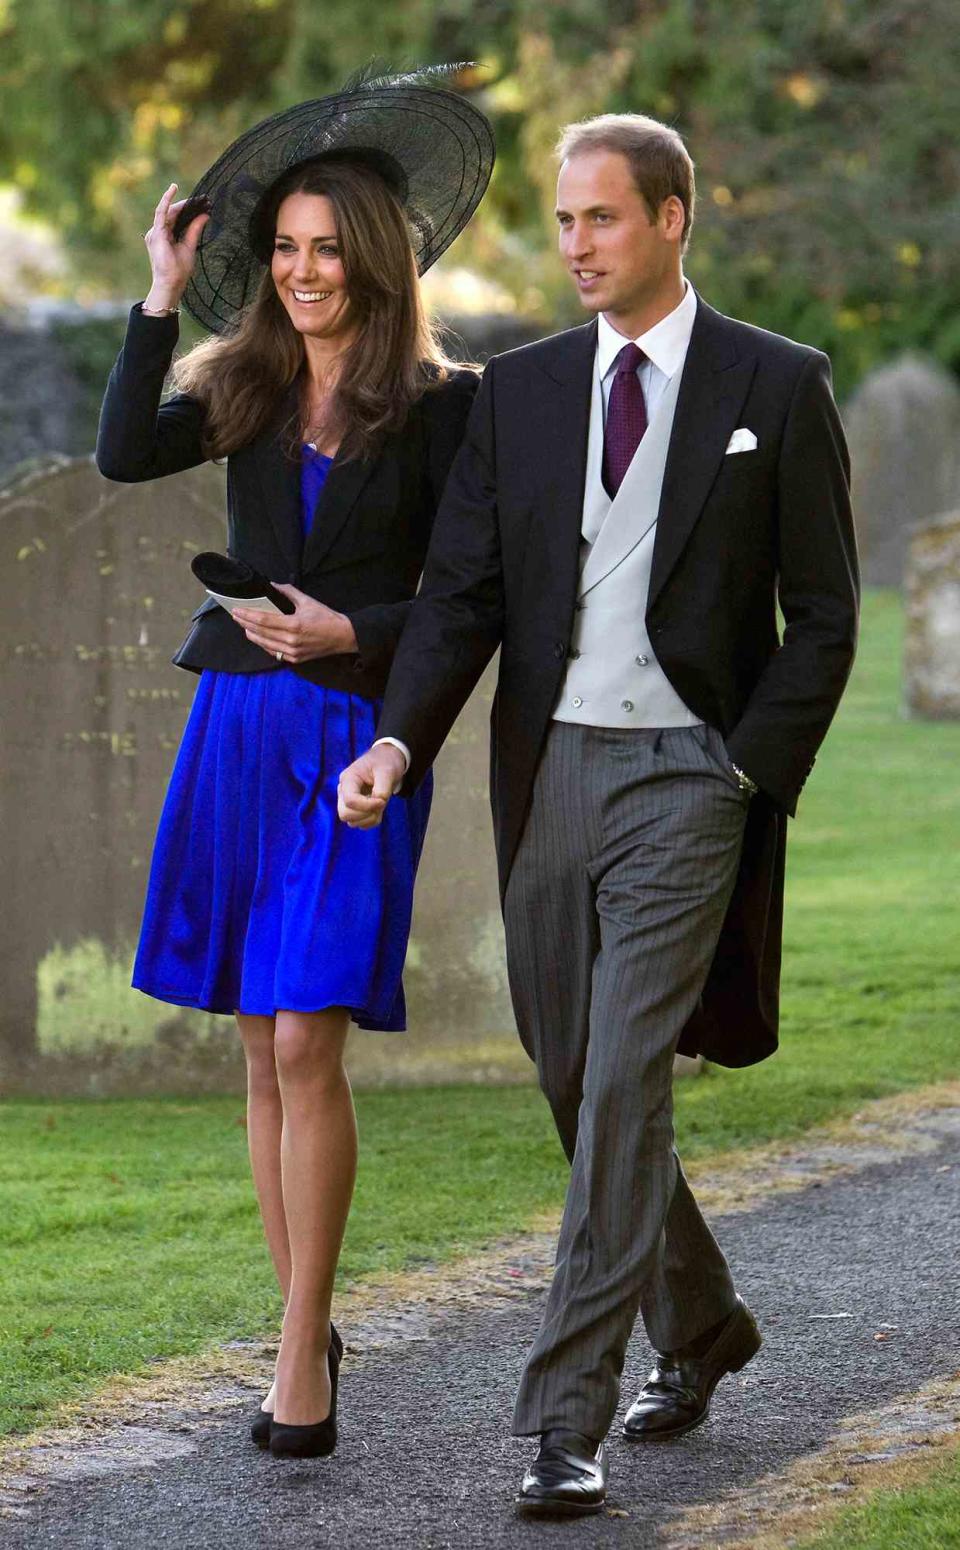 Prince William and Kate Middleton leave the wedding of their friends Harry Mead and Rosie Bradford in the village of Northleach, Gloucestershire.